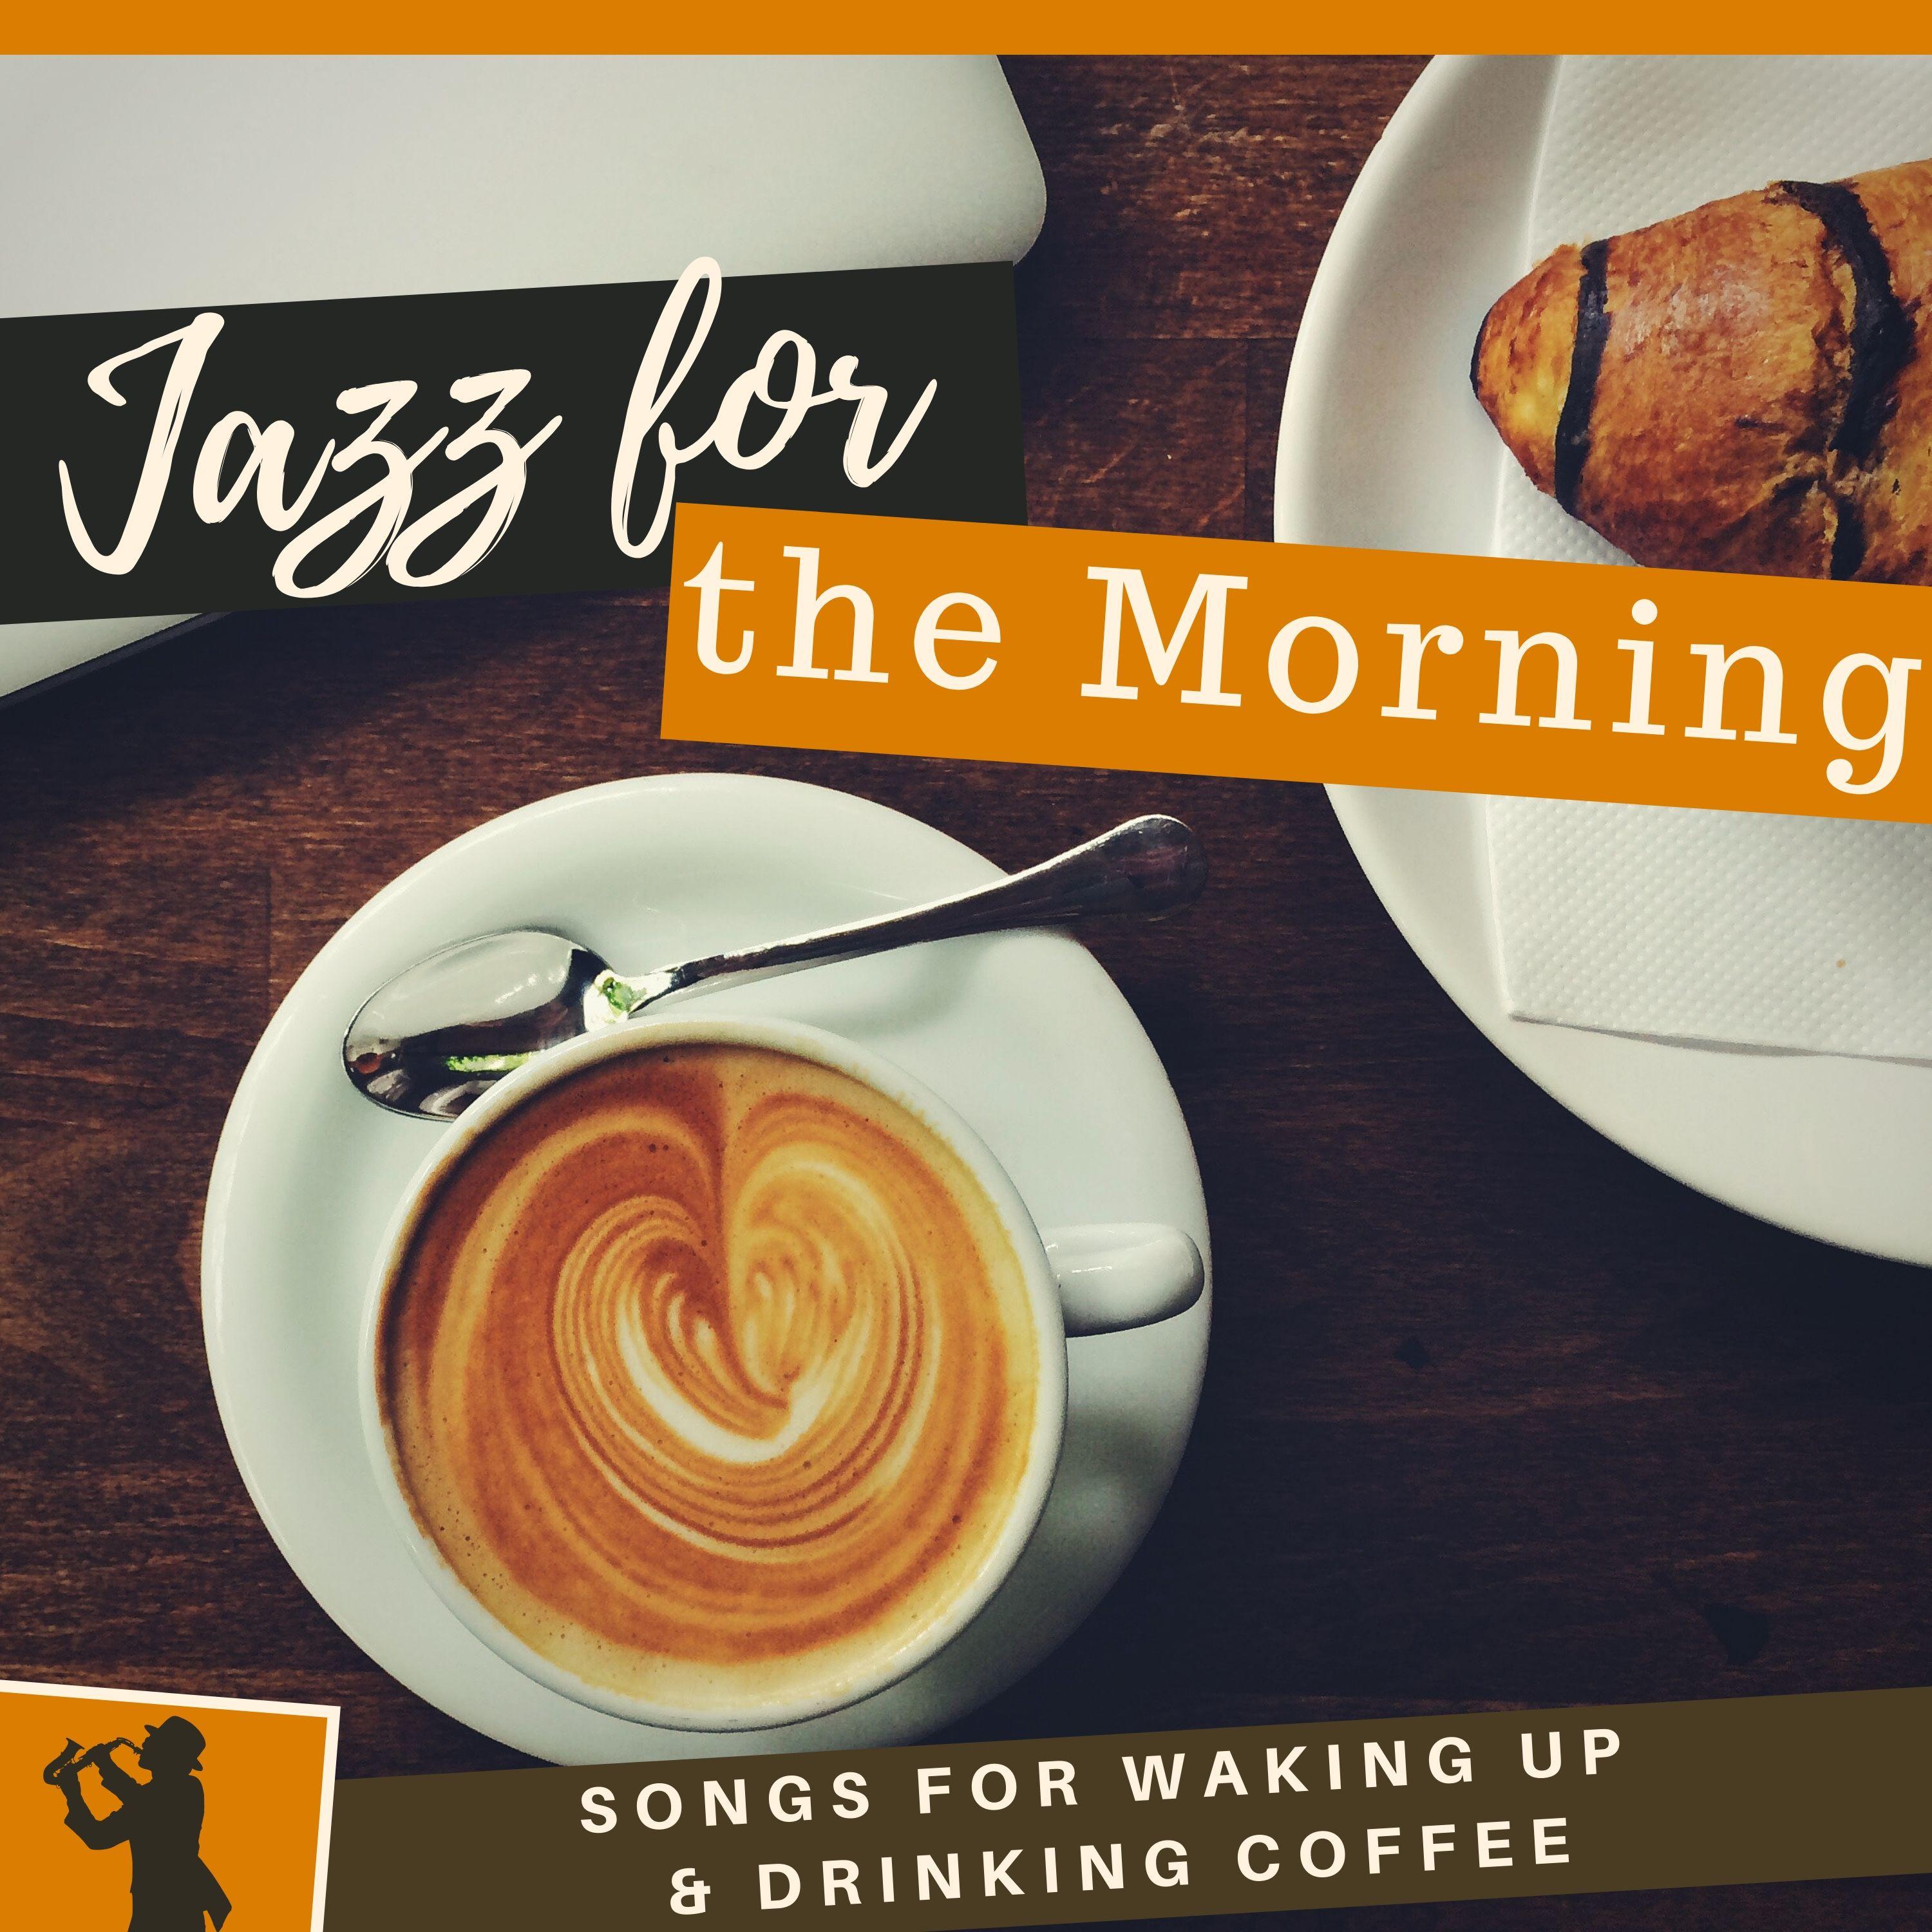 Jazz for the Morning - Songs for Waking Up & Drinking Coffee